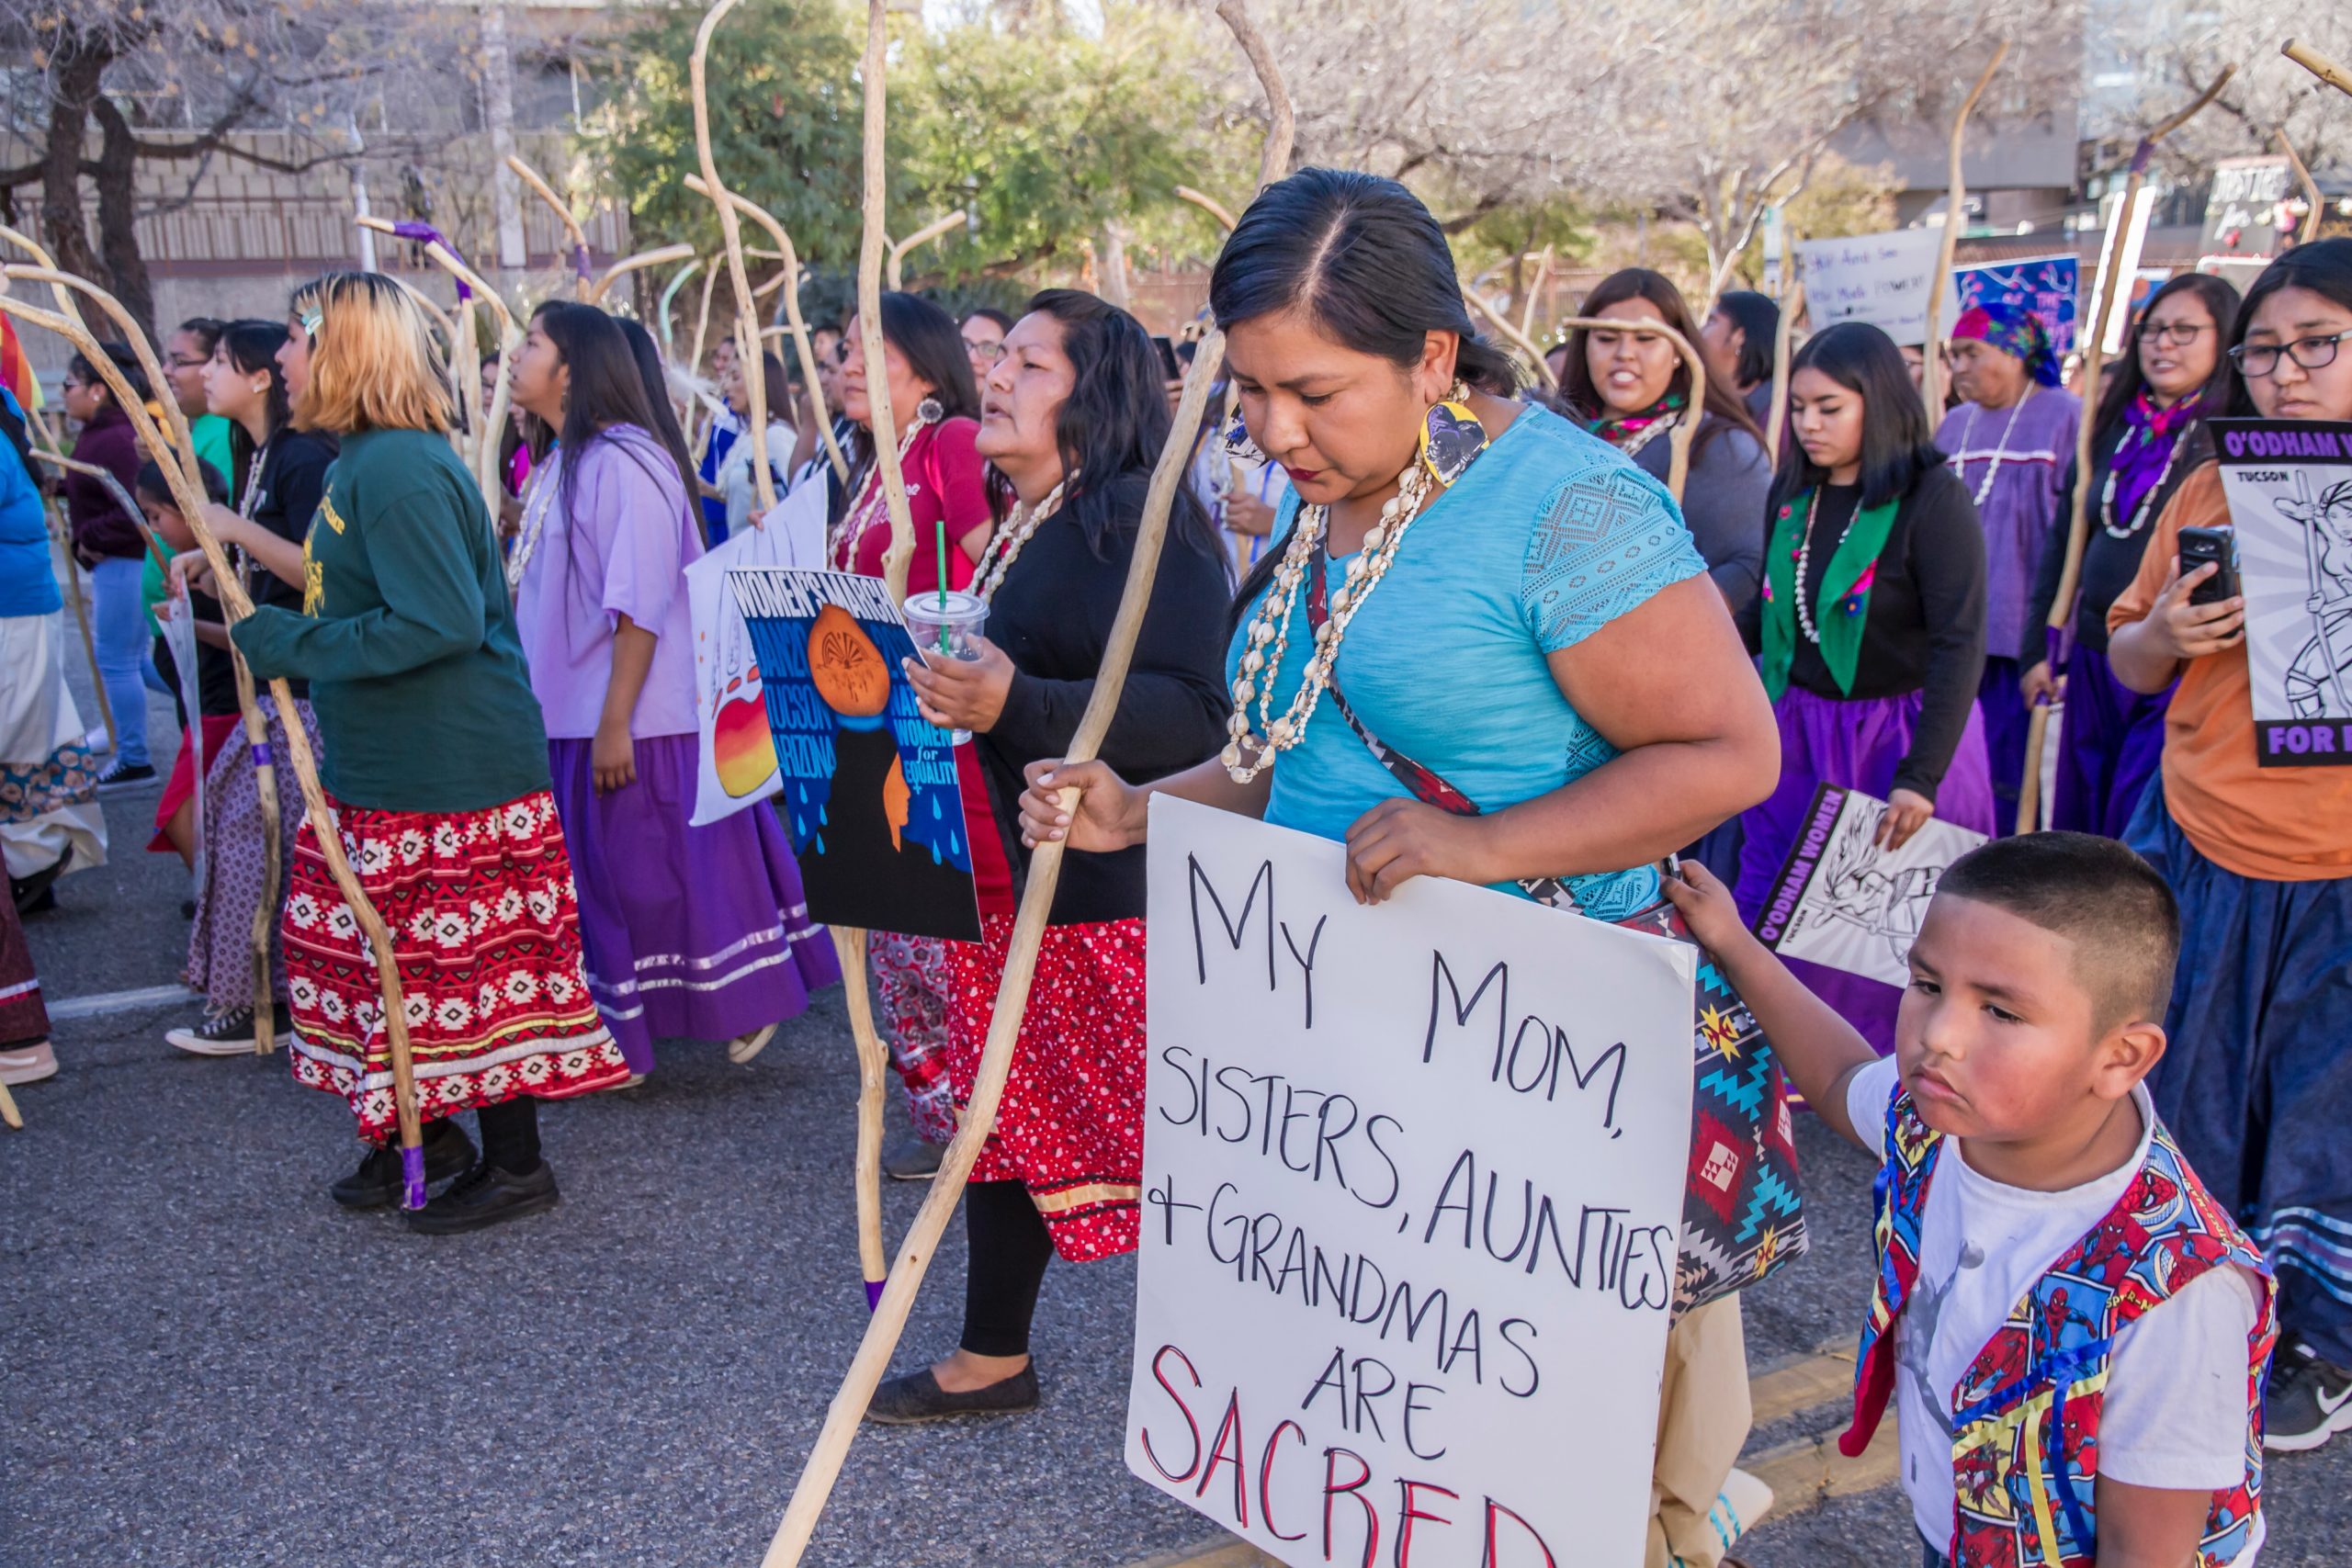 Indigenous Tohono Women led the Tucson 2019 Women’s March with a show of strength, resilience and power. This woman’s sign said: My Mom, Sisters, Aunties and Grandmas are sacred. Her son was by her side. International Women’s Day